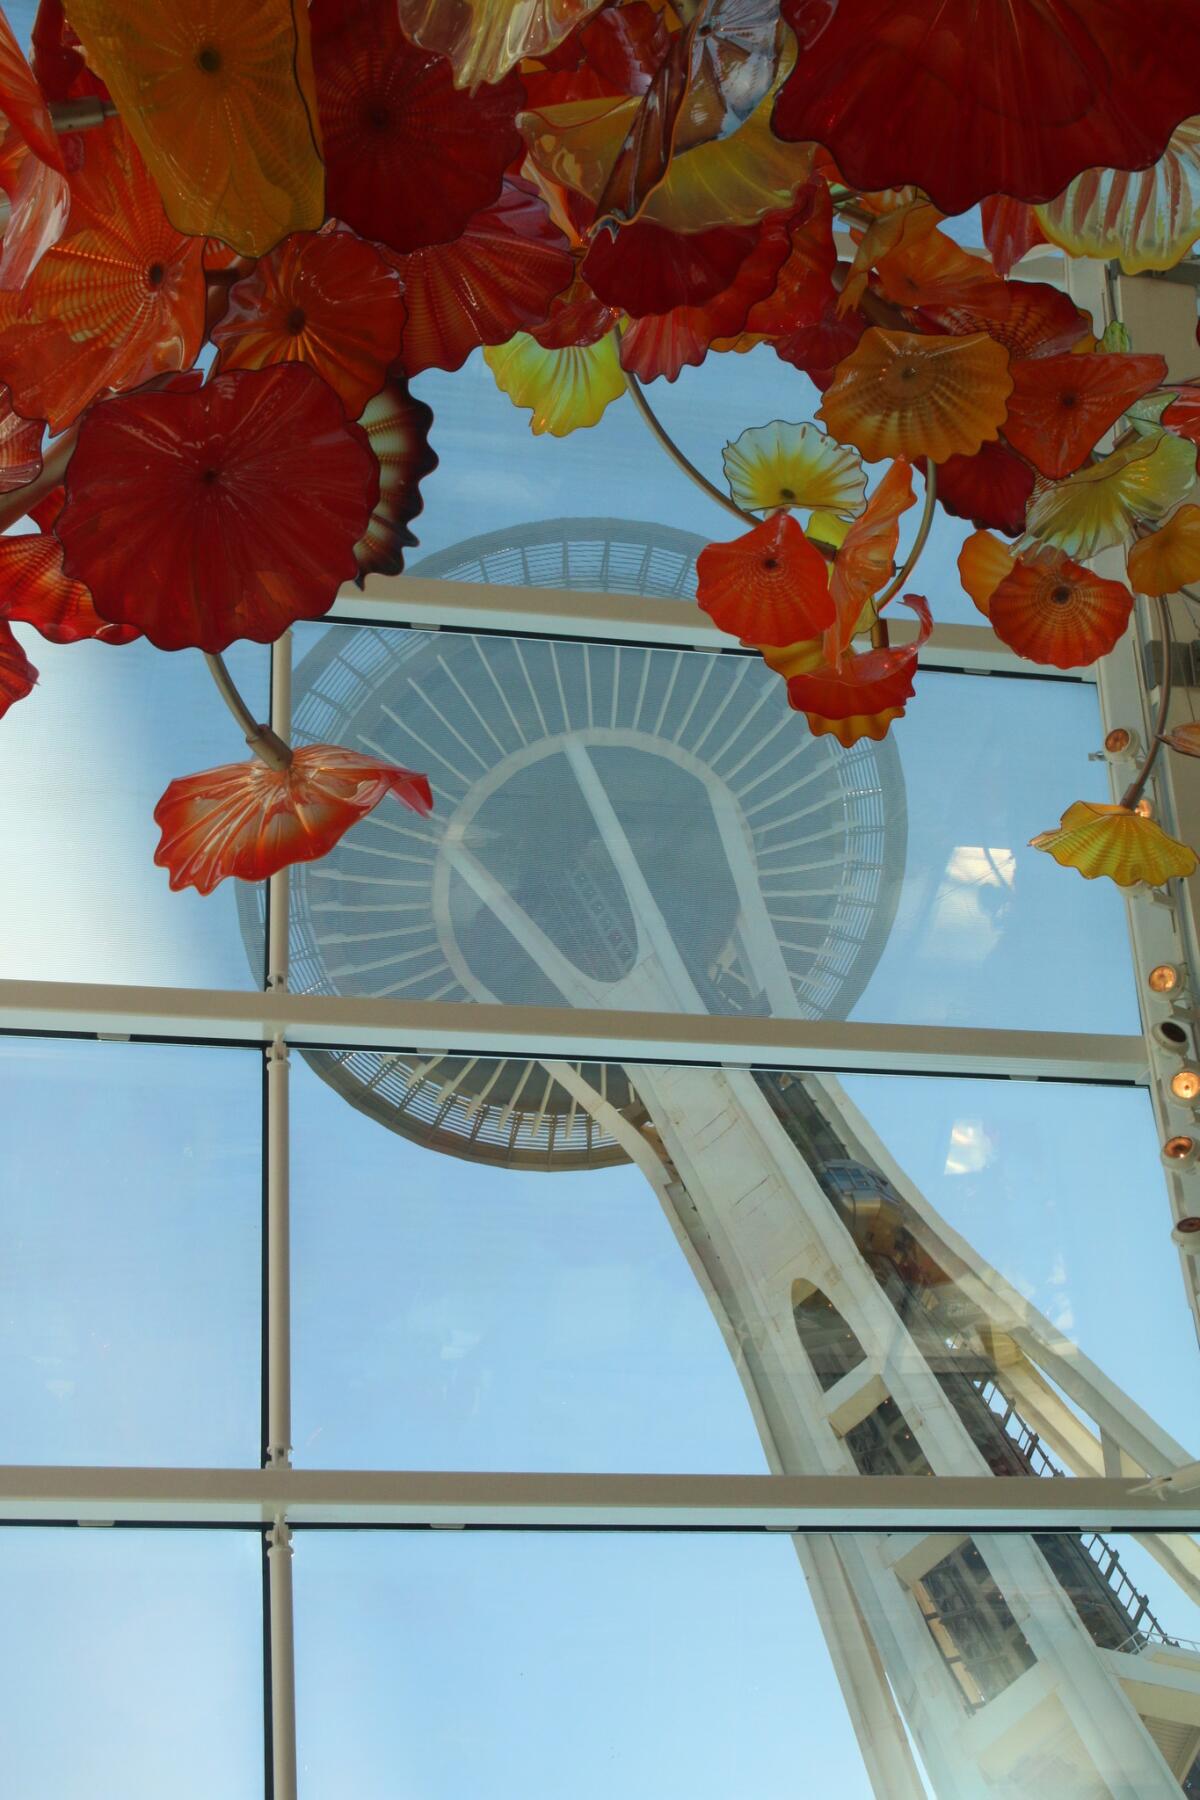 Chihuly Glass House and Gardens near the Space Needle in Seattle. (Jill Donaldson)